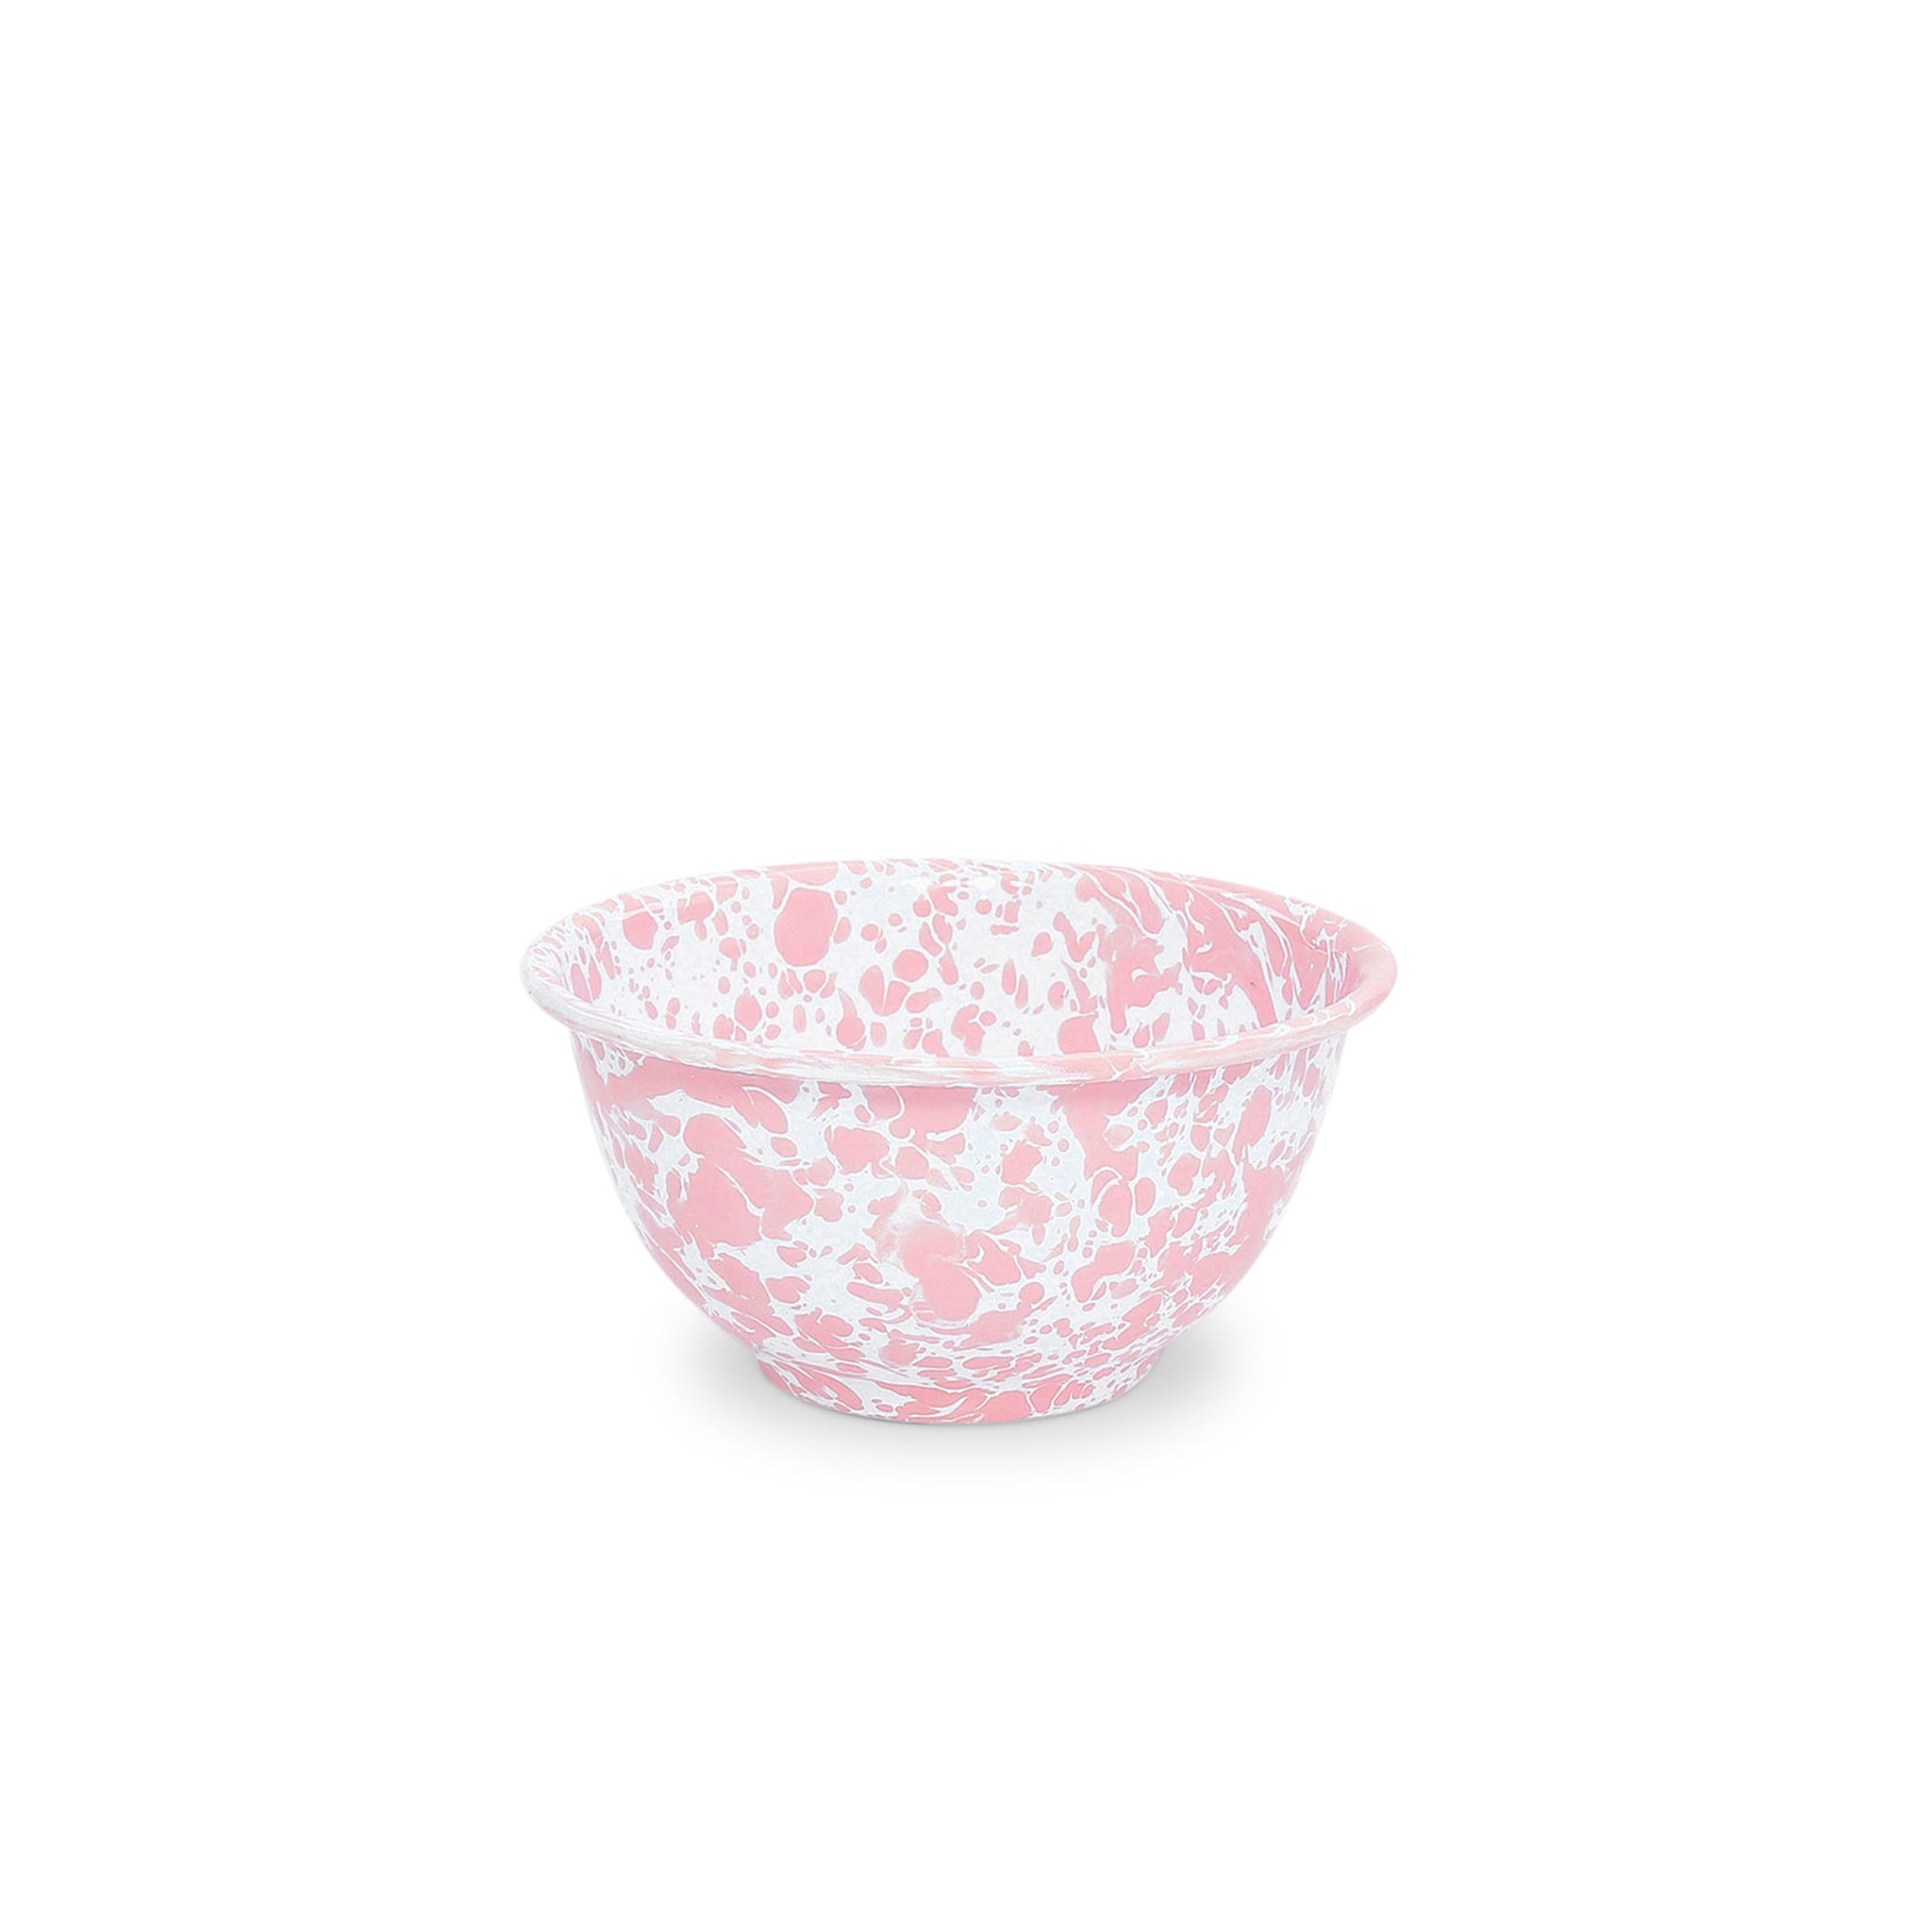 Splatter Small Footed Bowl - Pink